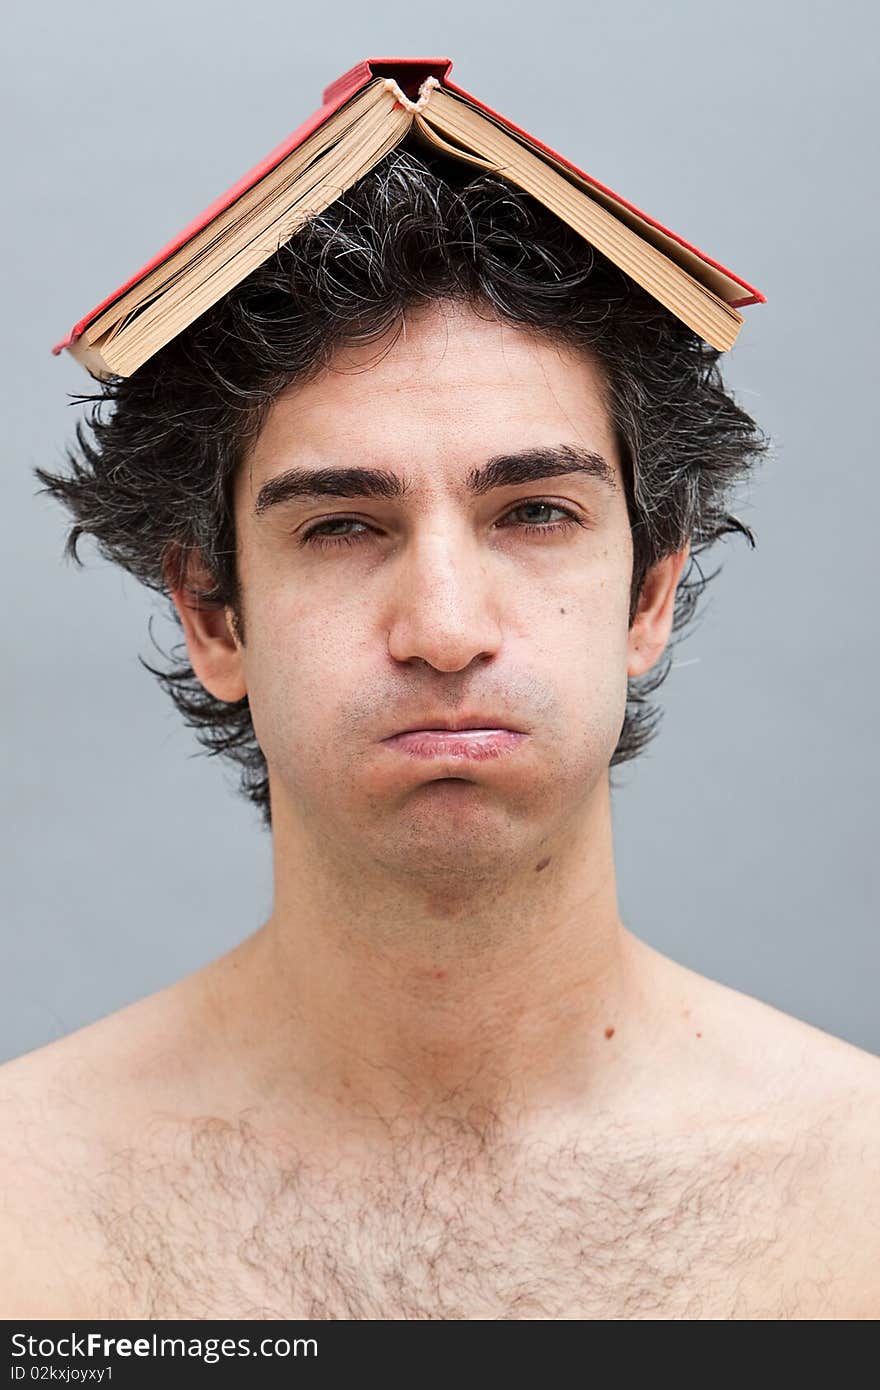 Bored lazy college student with a book on his head